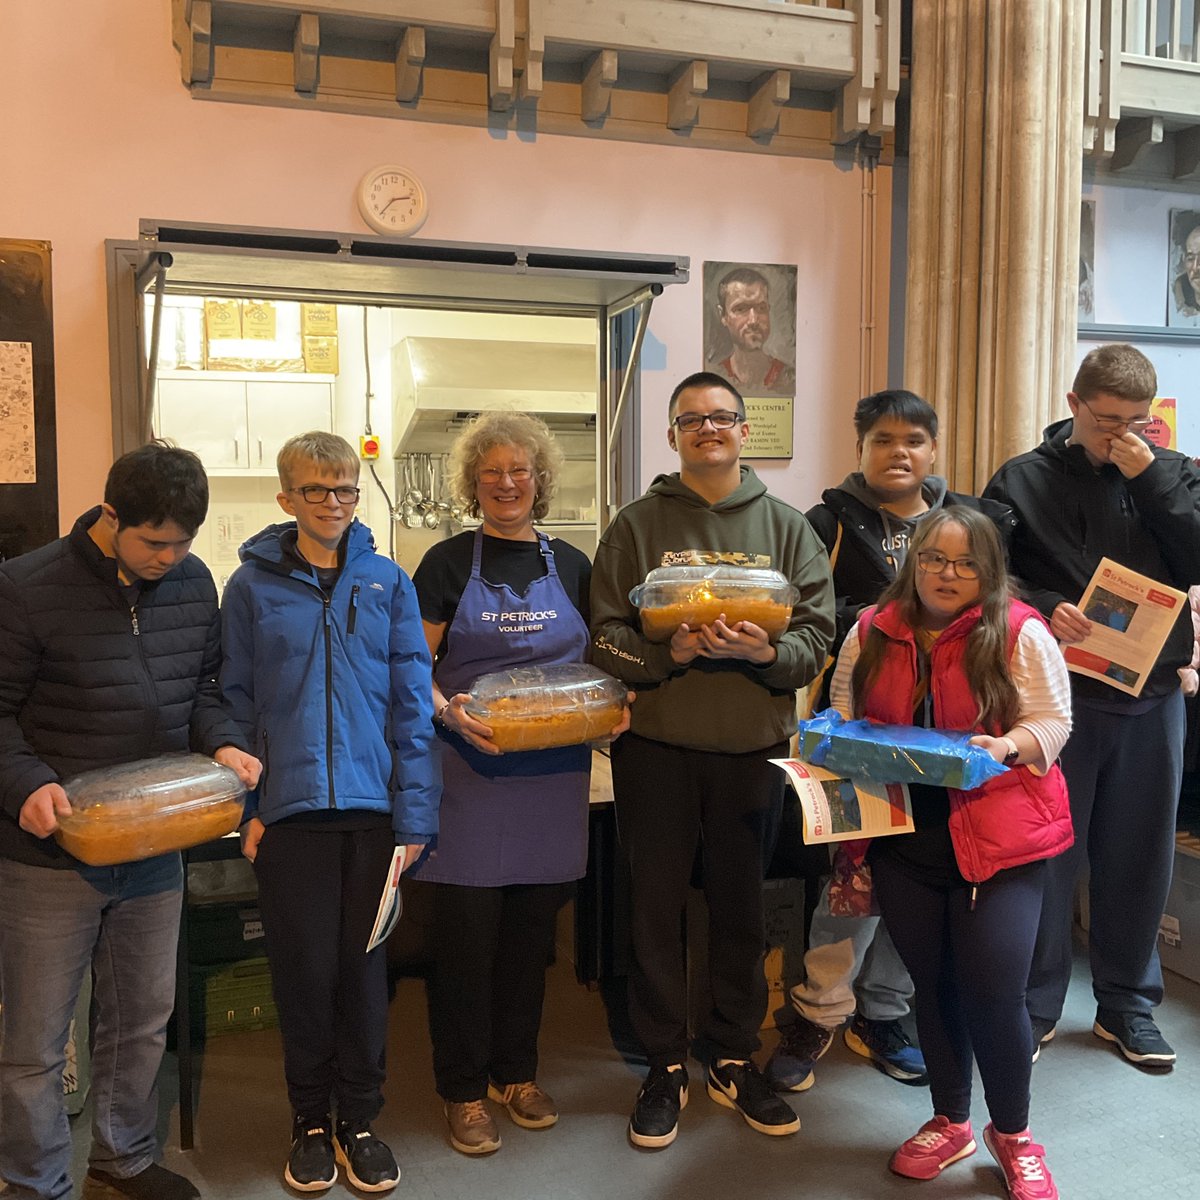 Our fantastic HILL students recently donated to @StPetrocks. As part of their course, they created a documentary on loneliness and community. They cooked food for the homeless individuals supported by @StPetrocks. Well done, everyone. #ExeCollProud